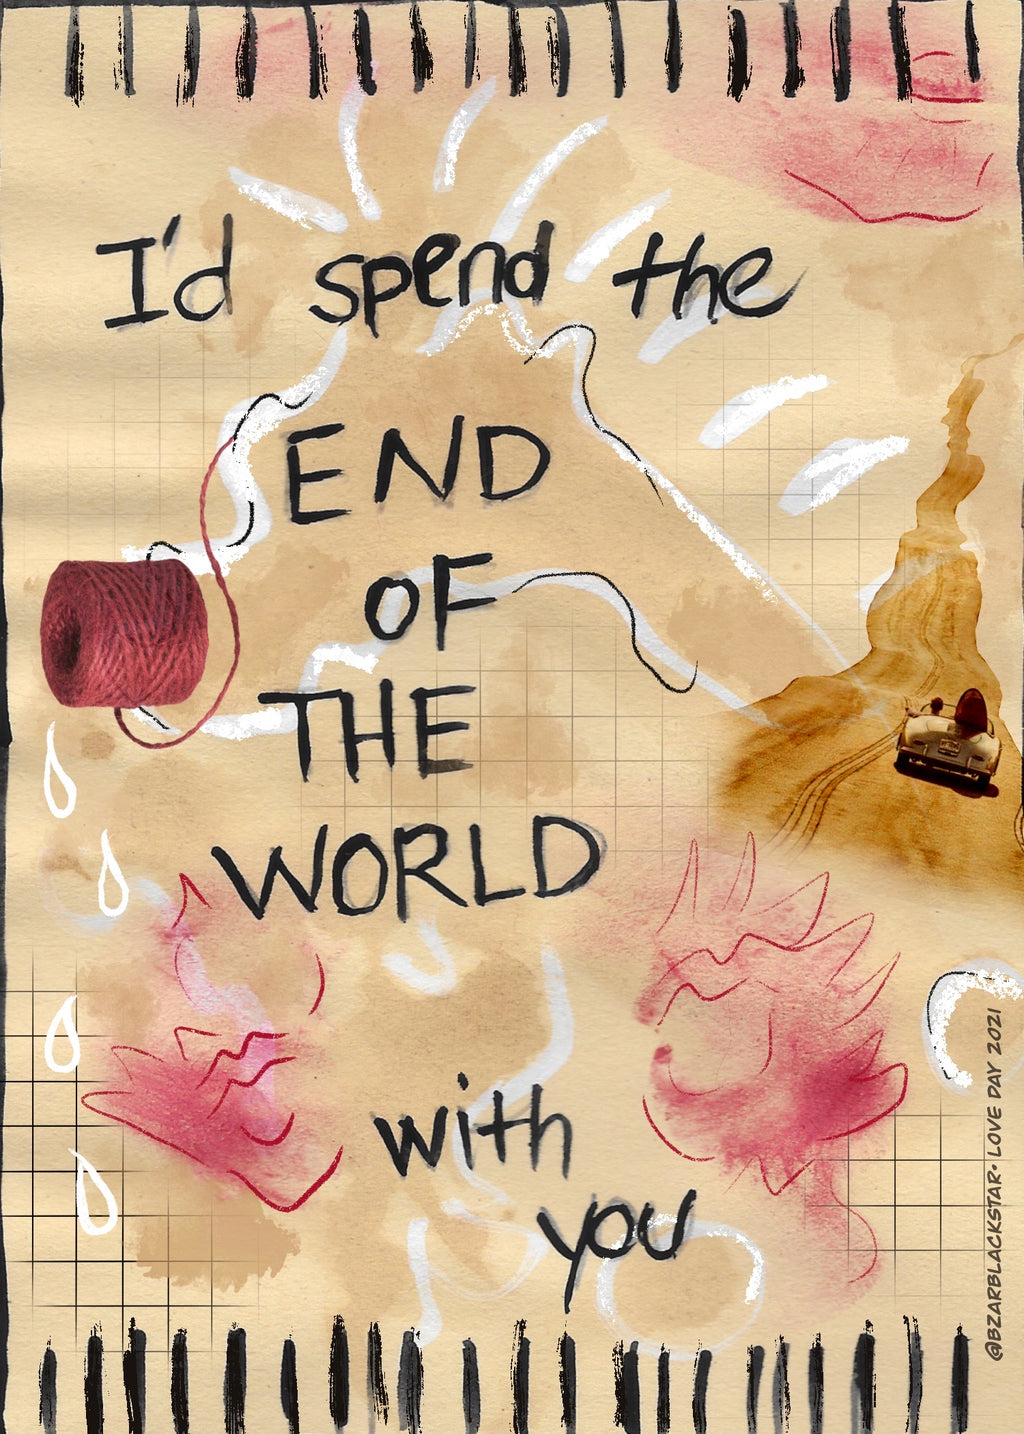 I’d Spend The End of The World With You